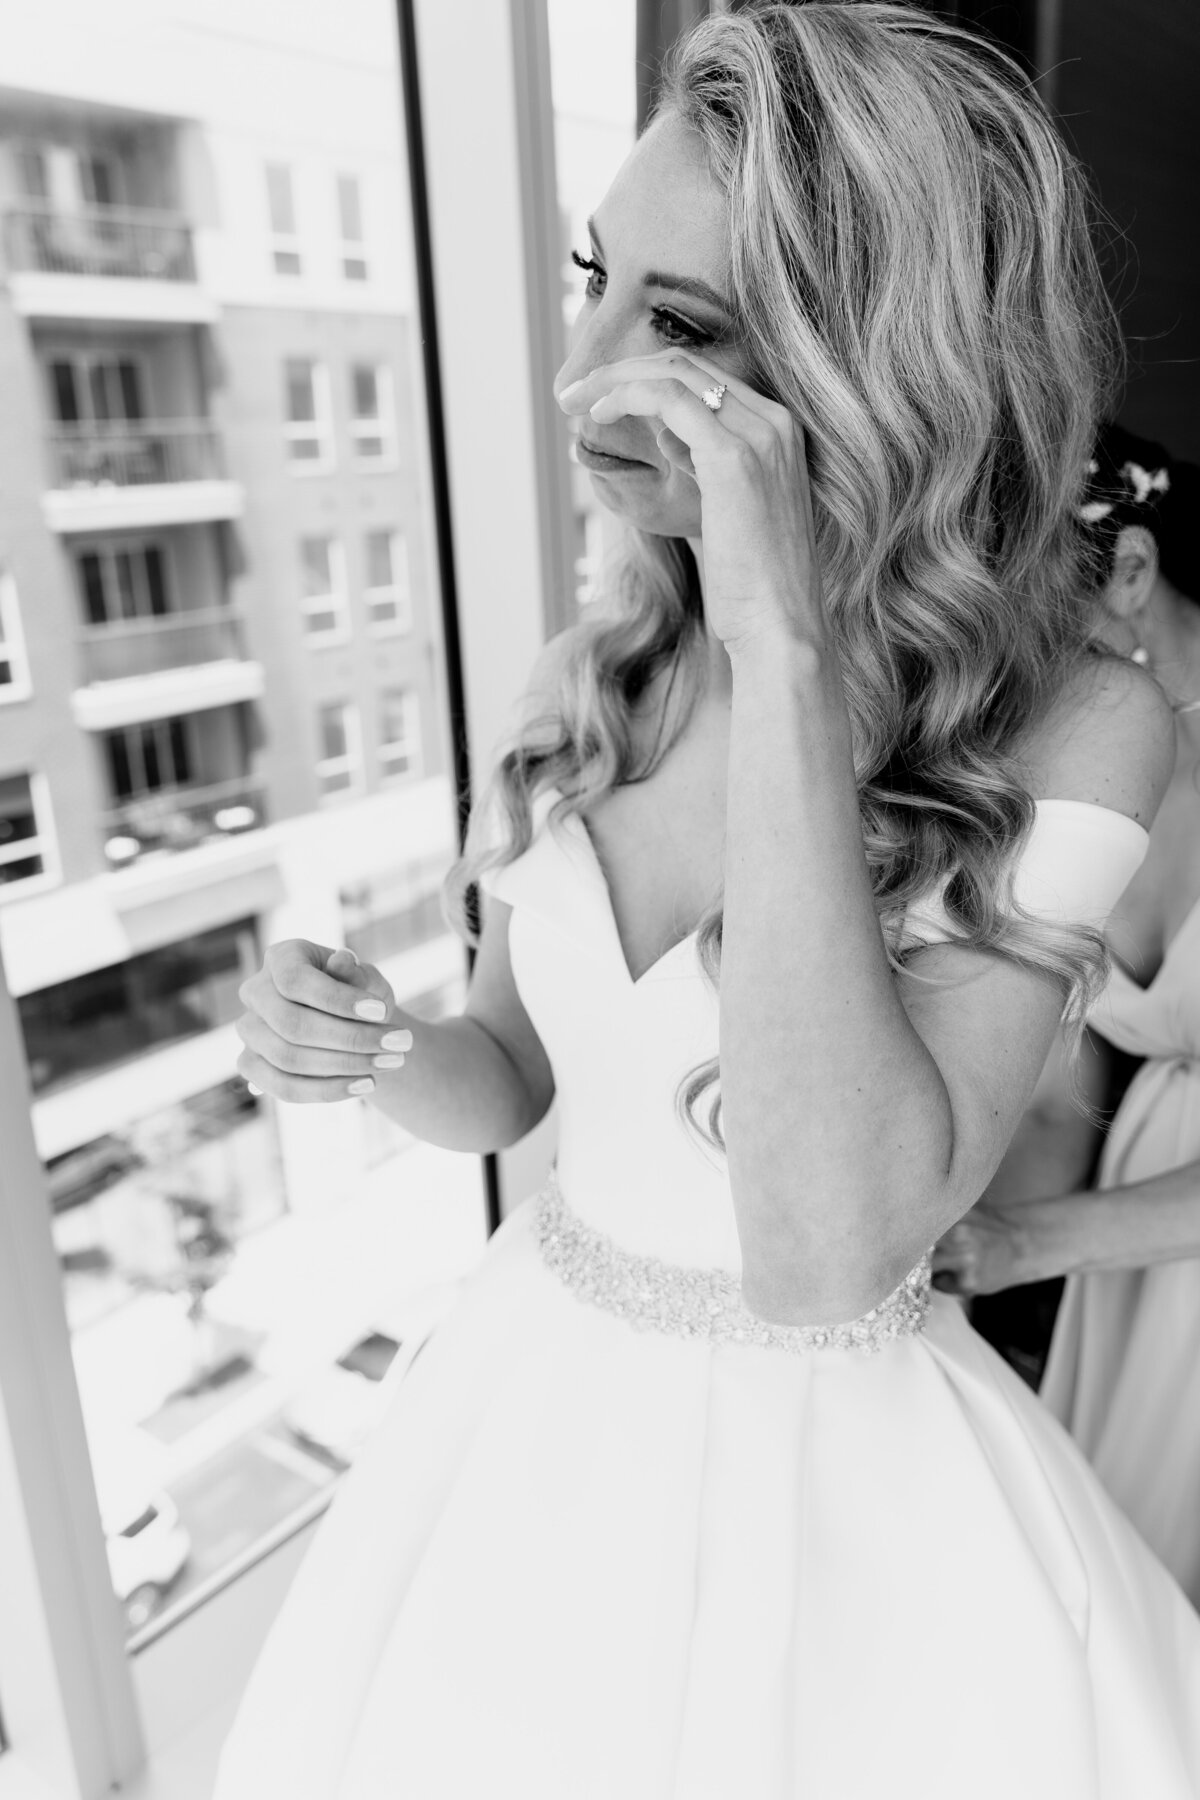 Brides gets emotion during getting ready